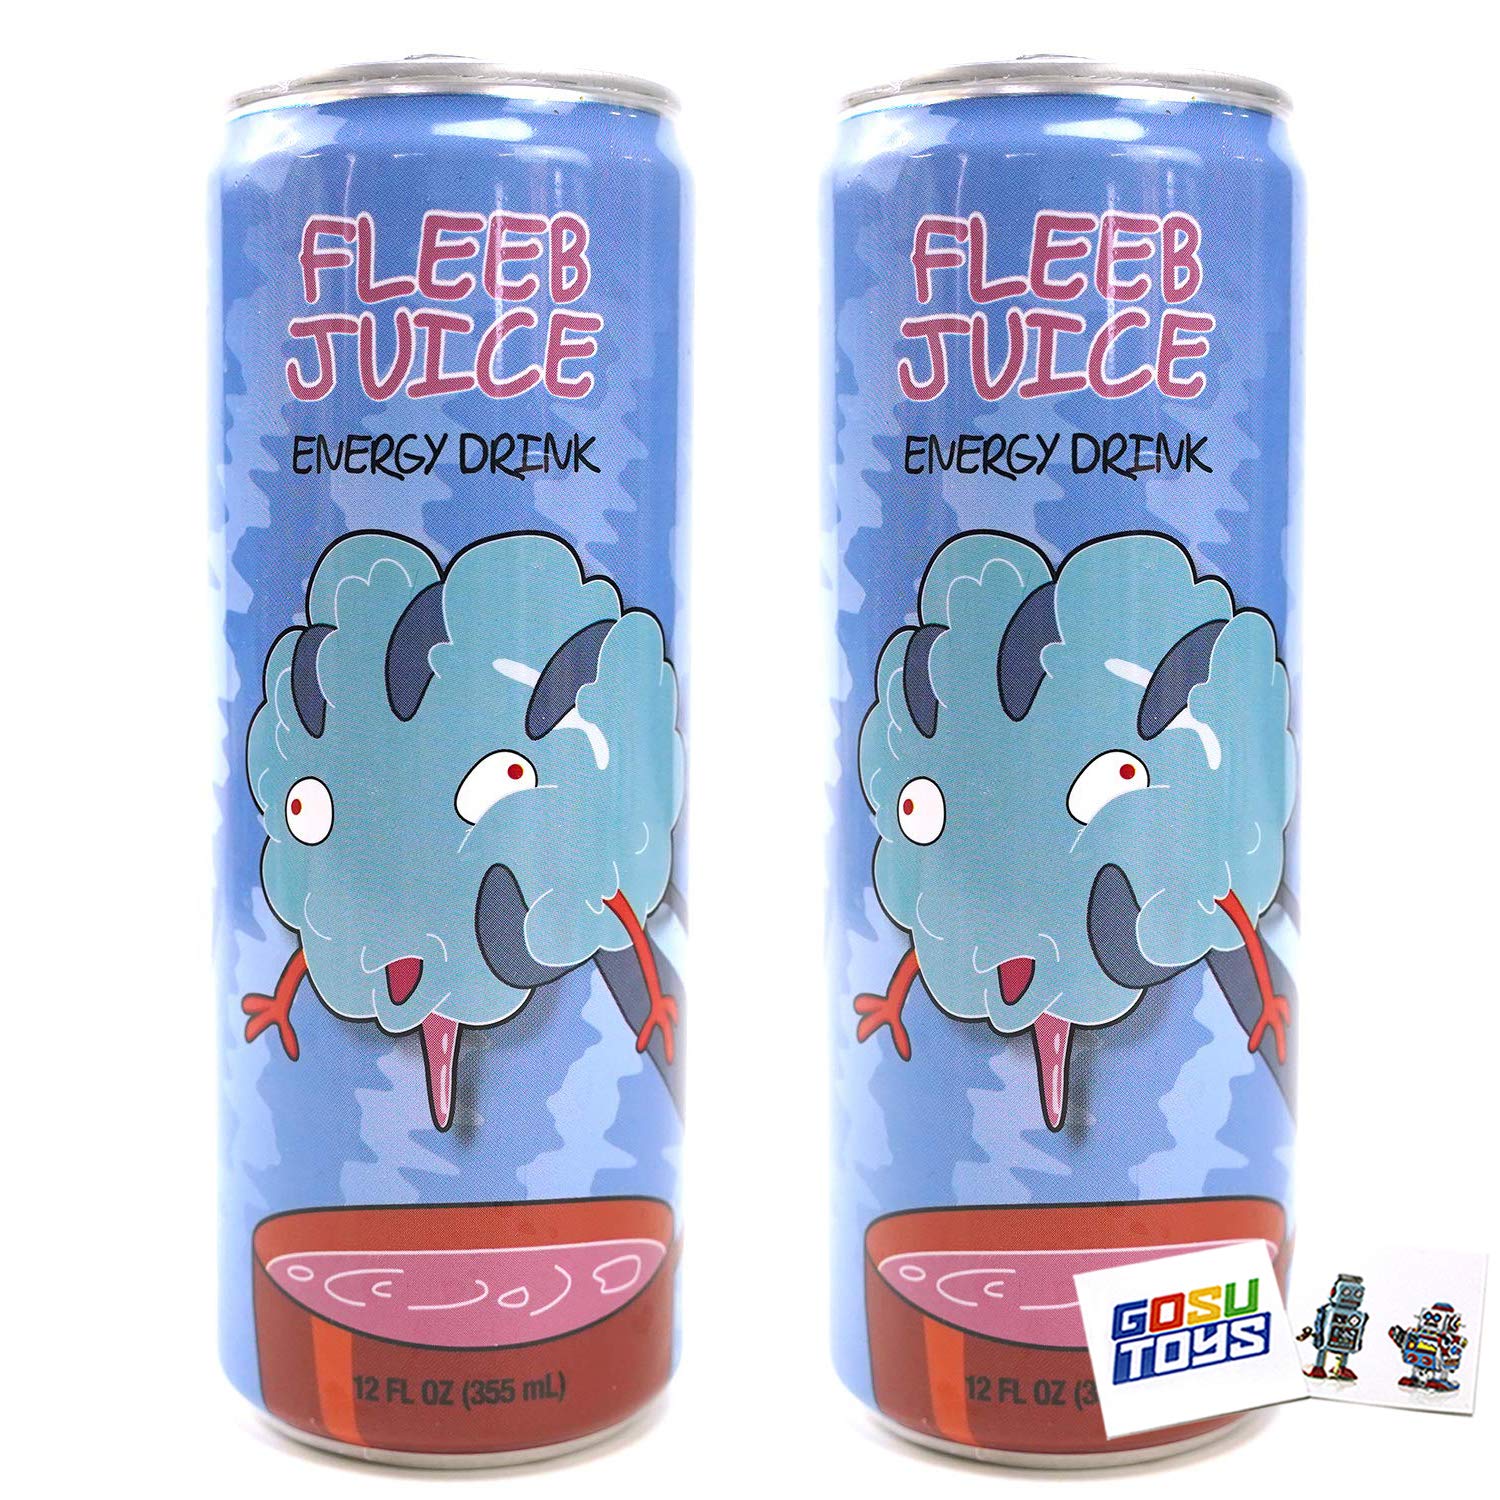 Rick and Morty Fleeb Juice Energy Drink 12 FL OZ (355mL) Can (2 Pack) With 2 GosuToys Stickers